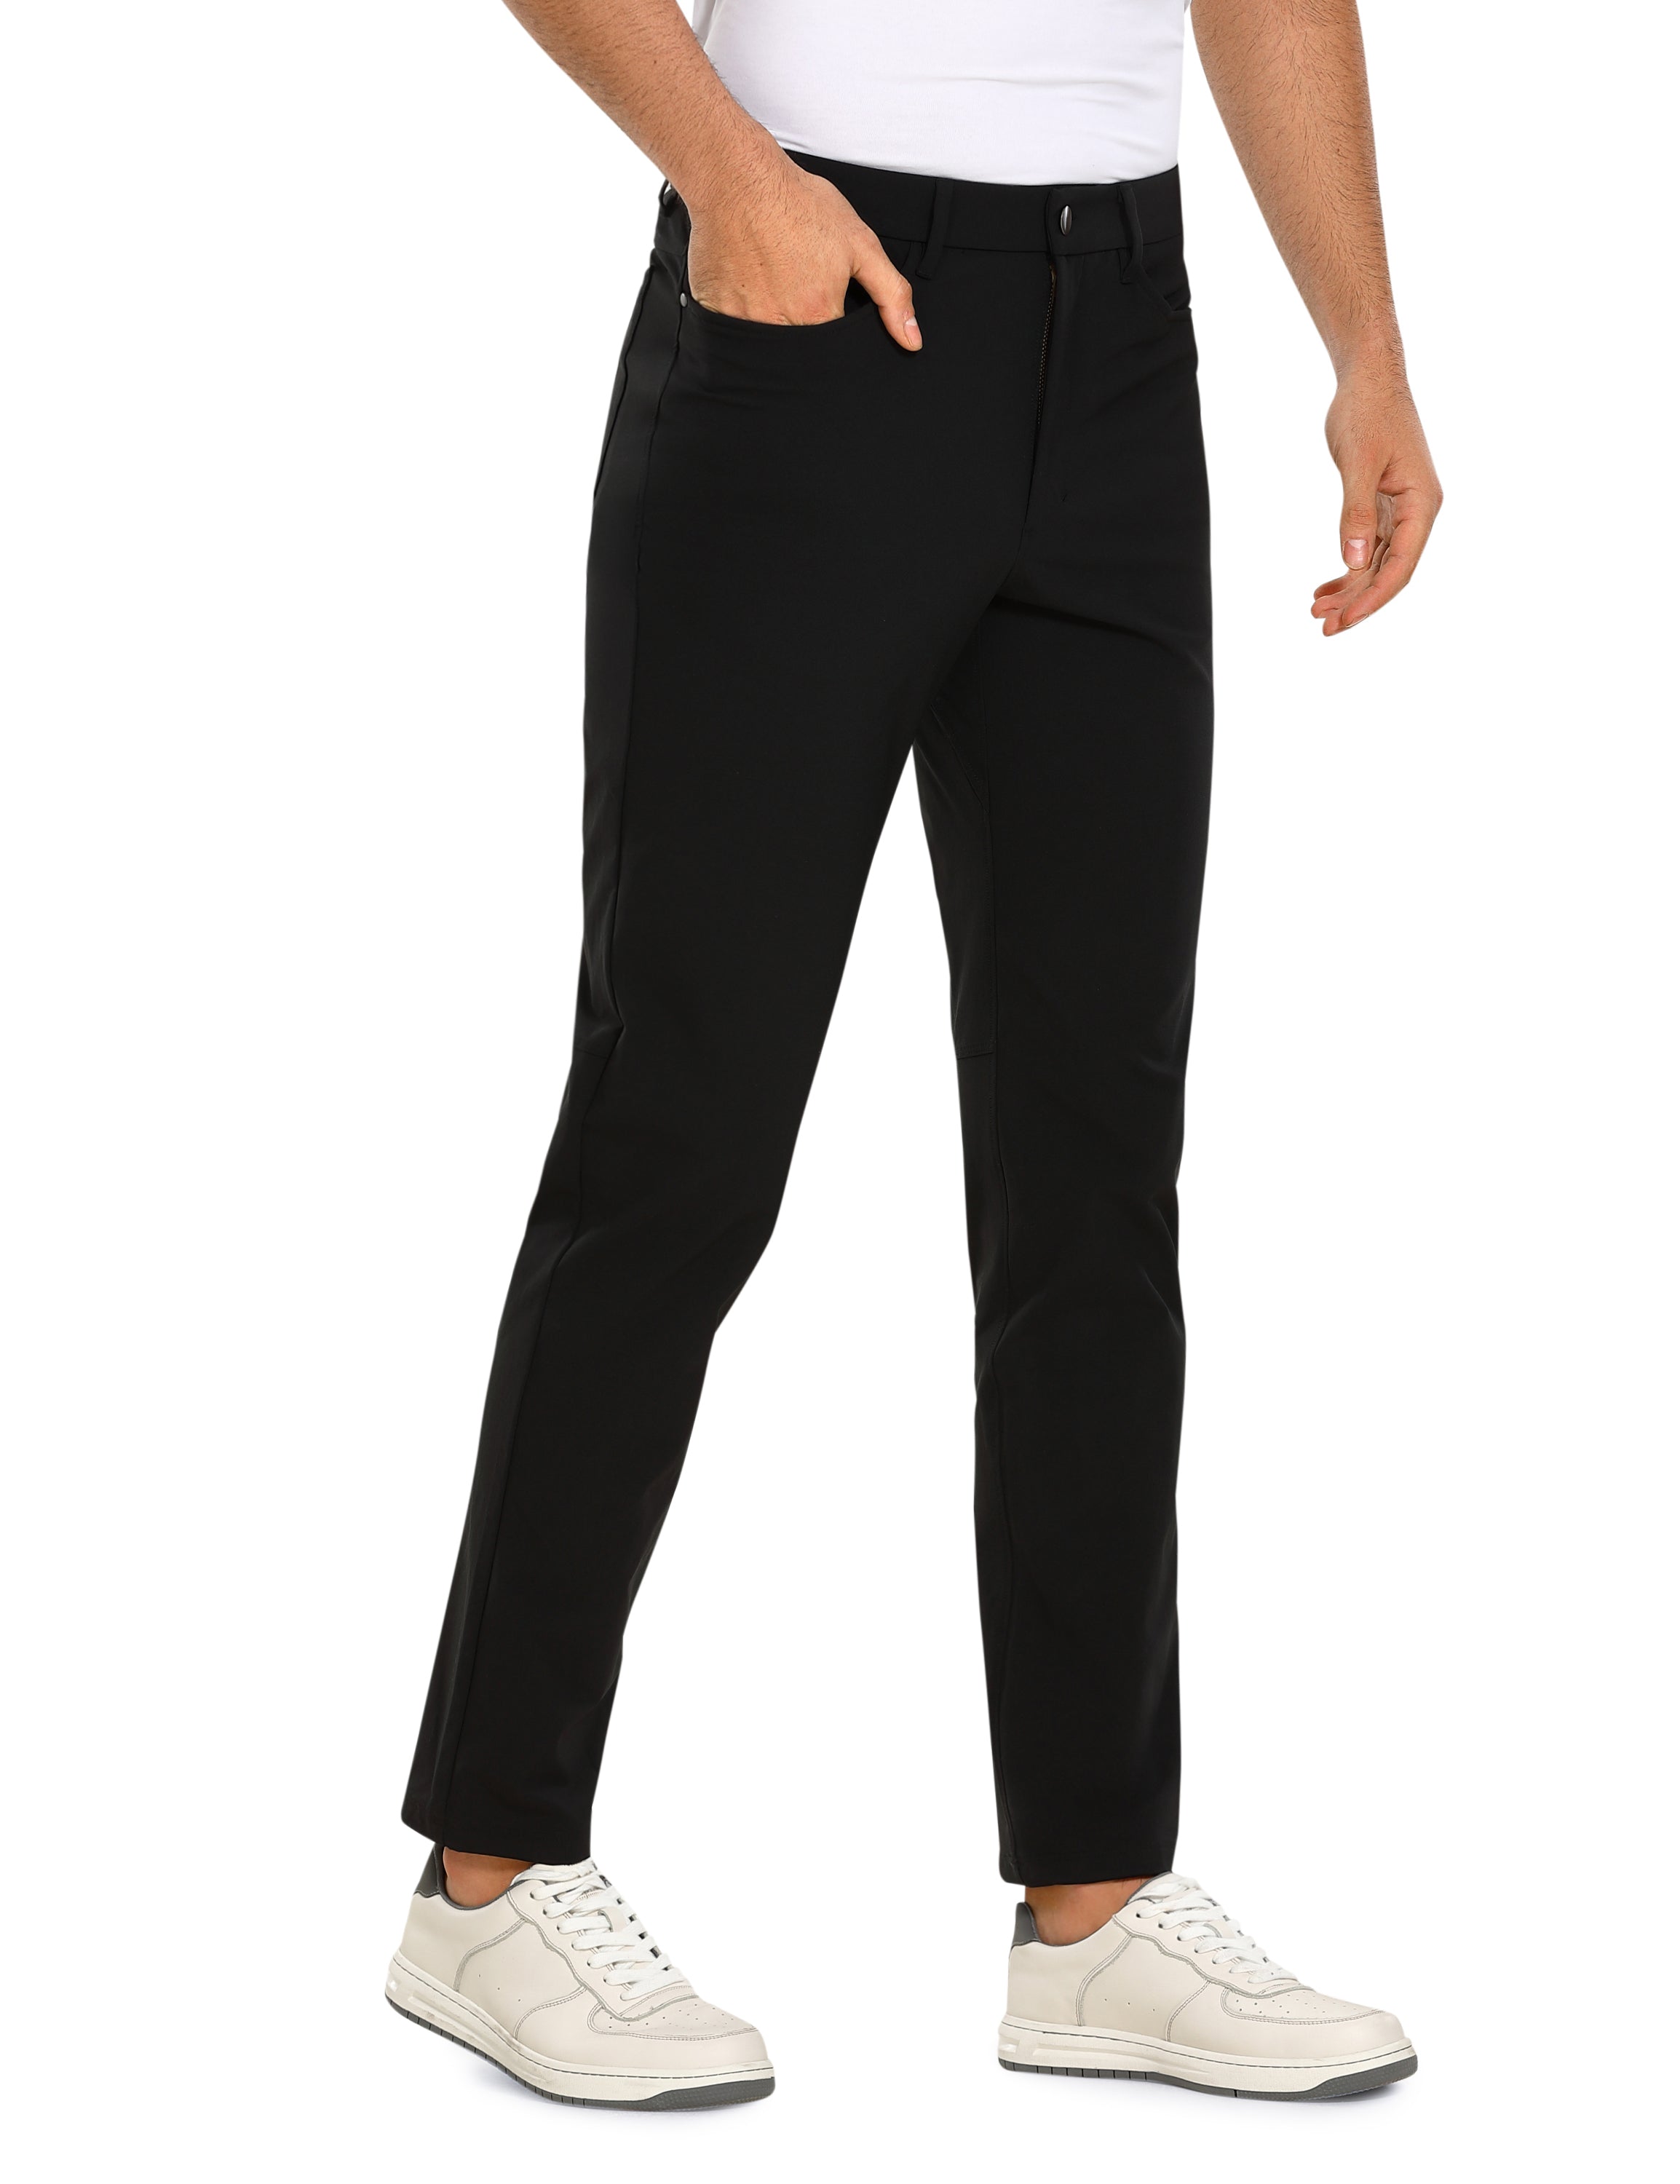 CRZ YOGA Women's High Rise Golf Pants Quick Dry Stretch Casual Straight Leg  Dress Work Pants with 5 Pockets 31 Black